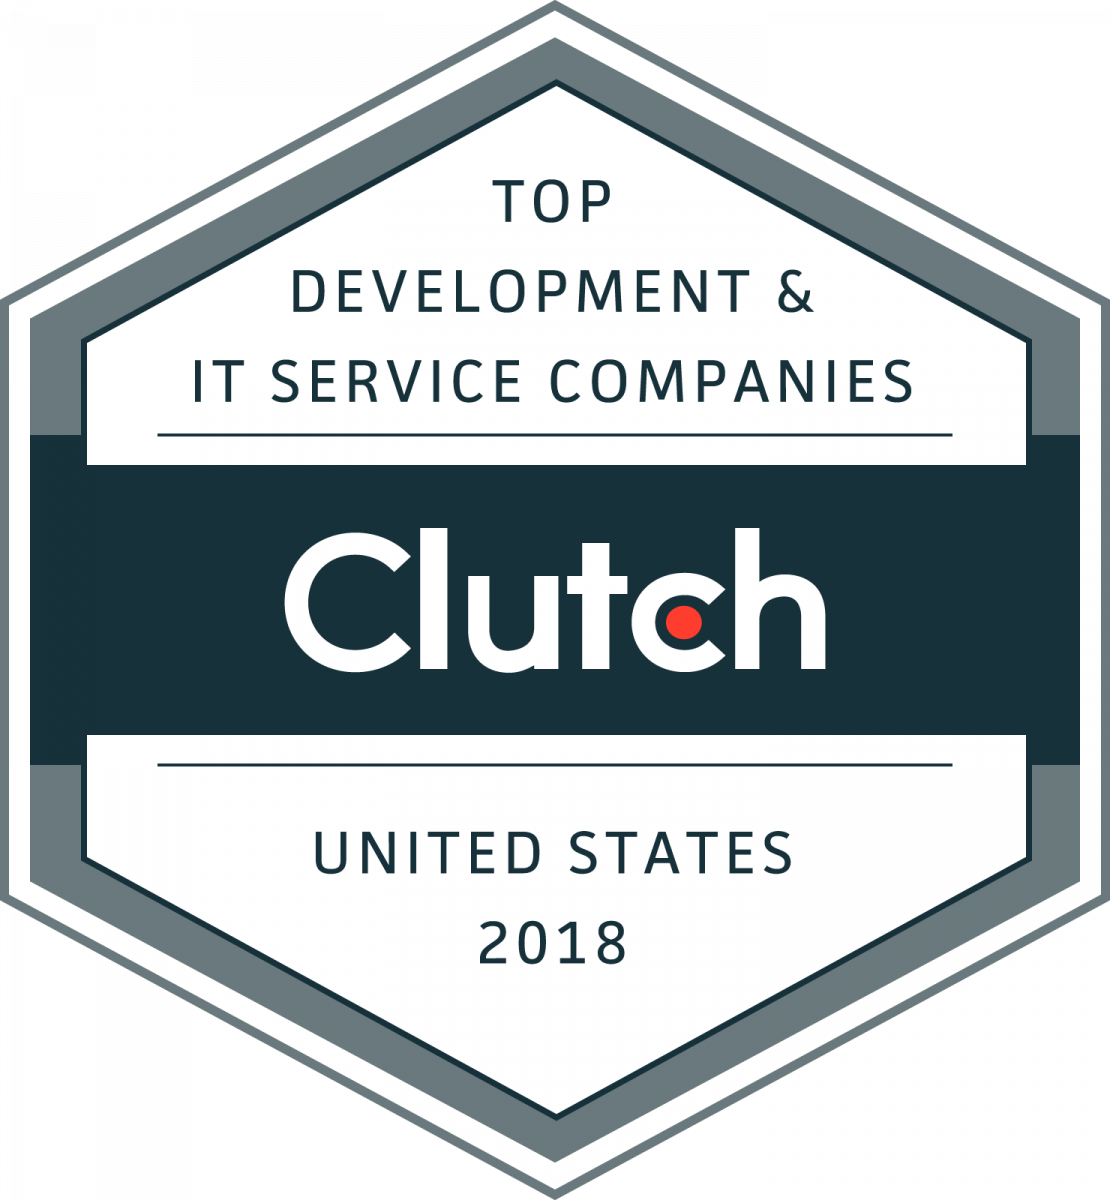 Clutch-TopITserviceCompanies